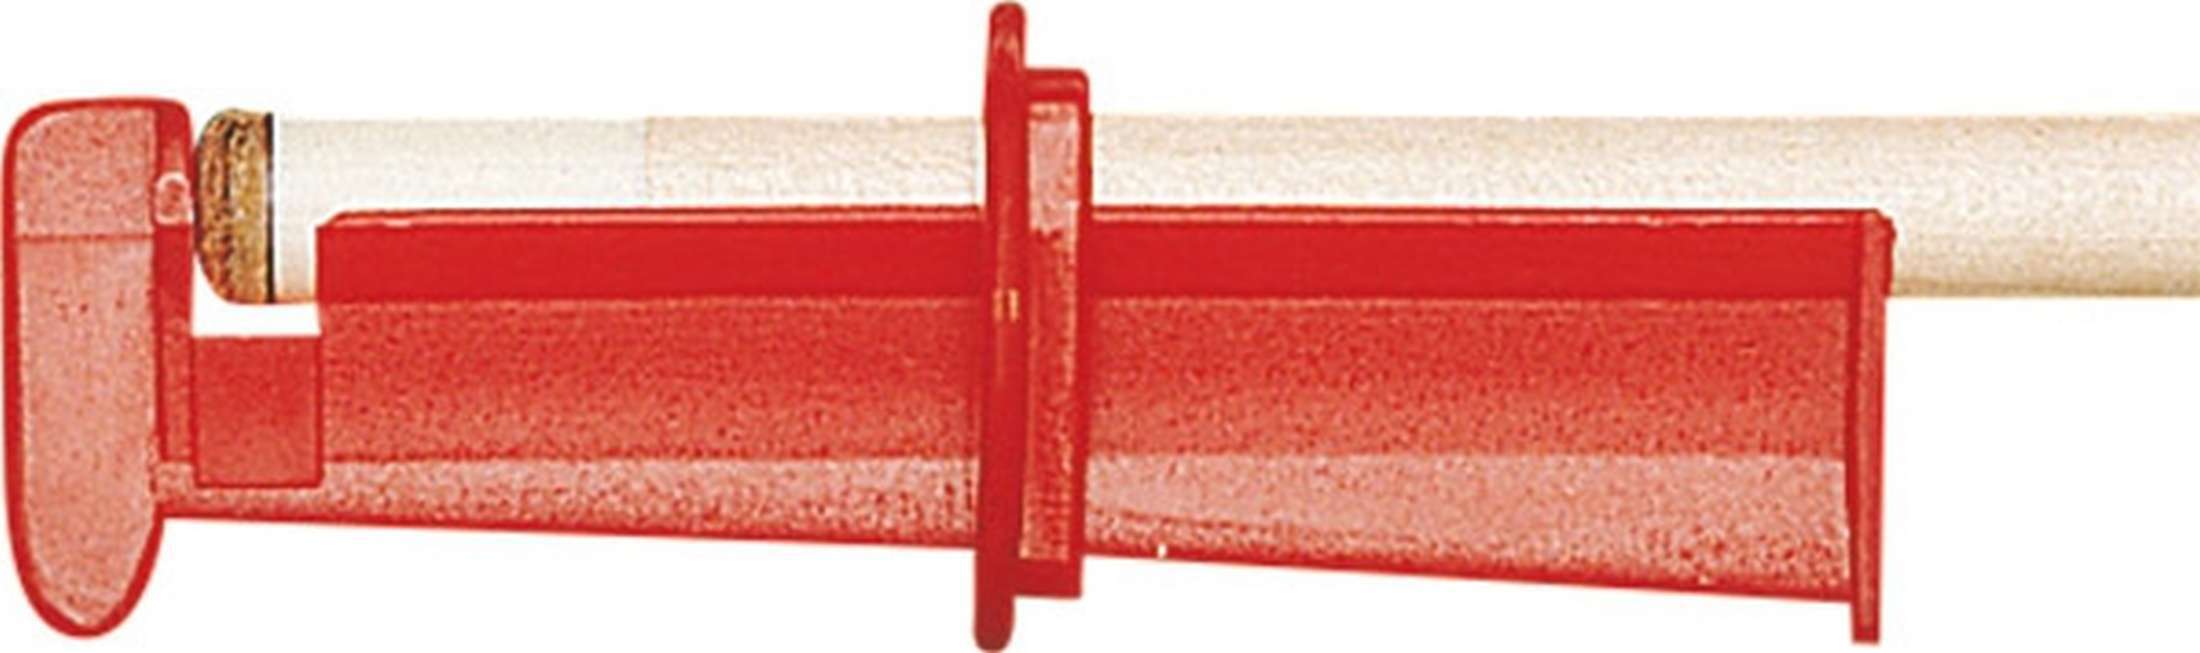 PVC leather clamp for billiard cues-1